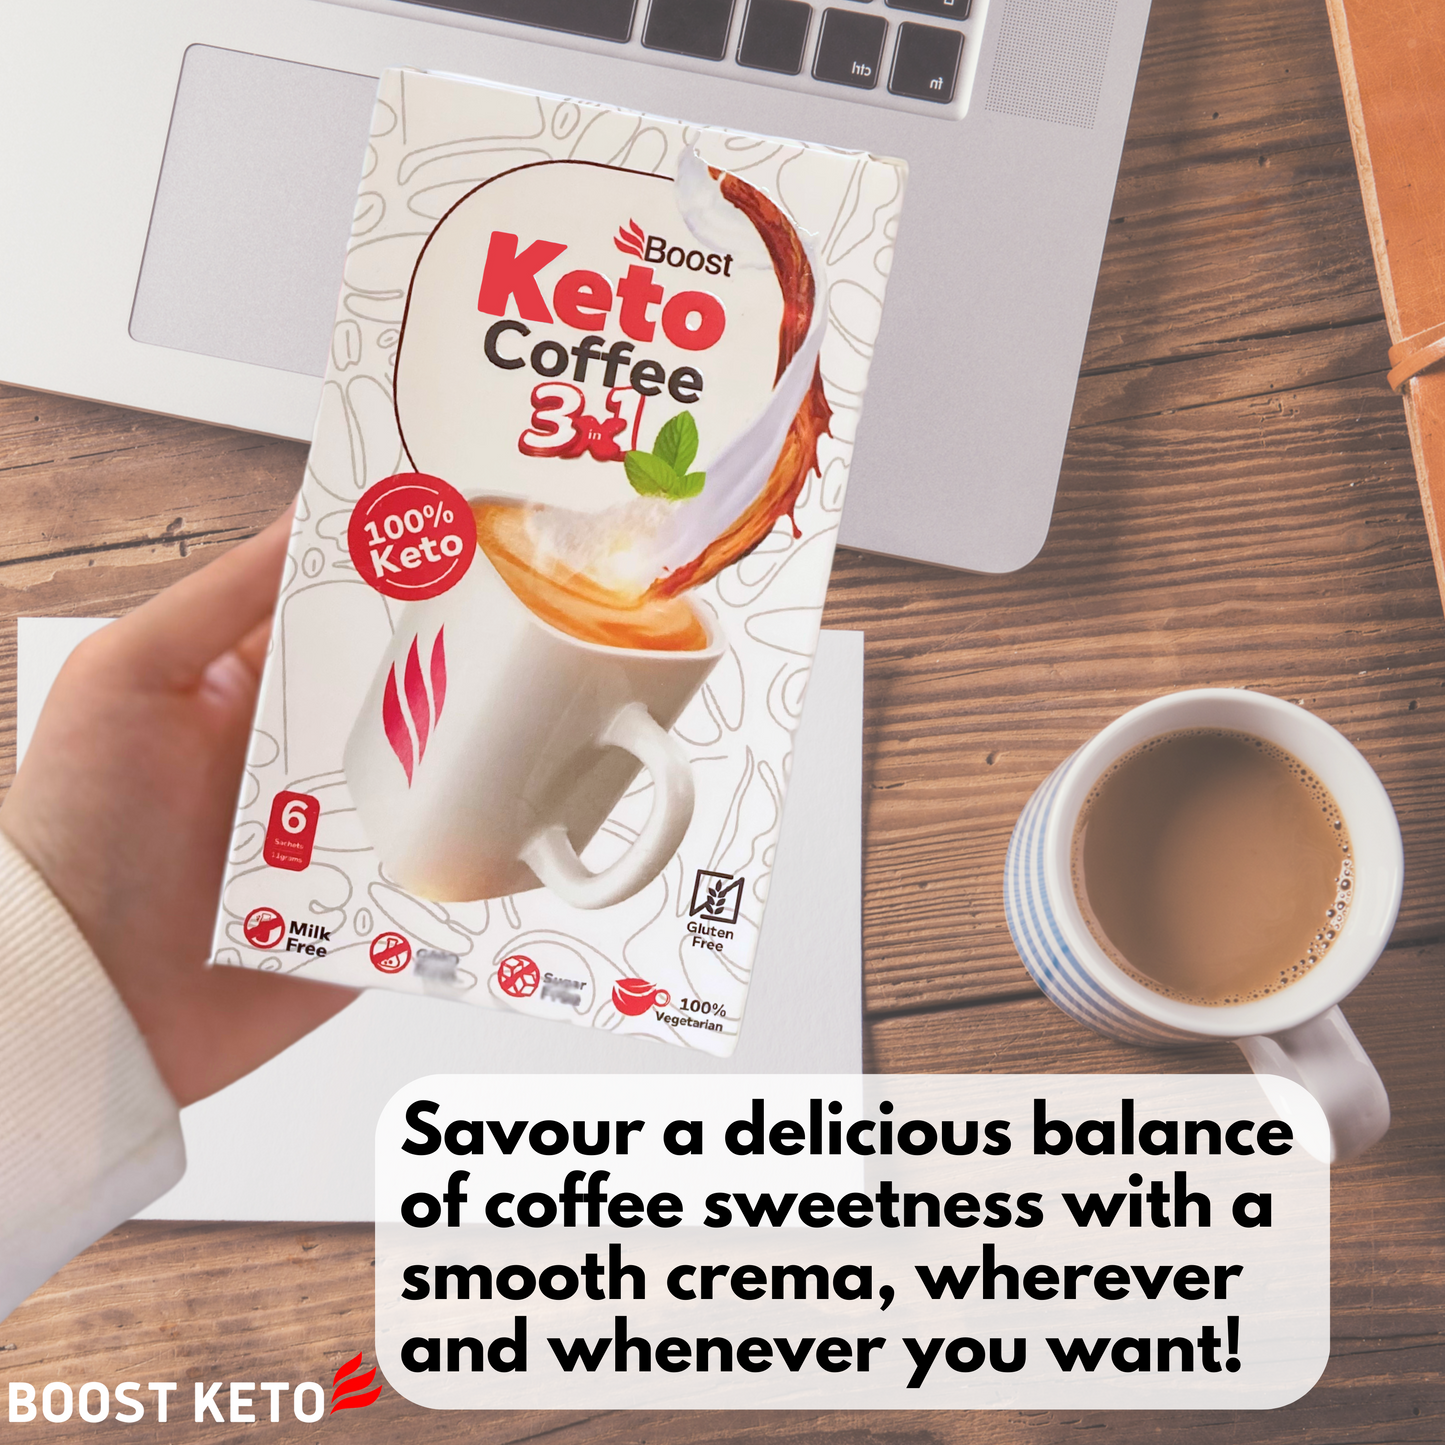 Boost keto 3 in 1 Coffee Mix